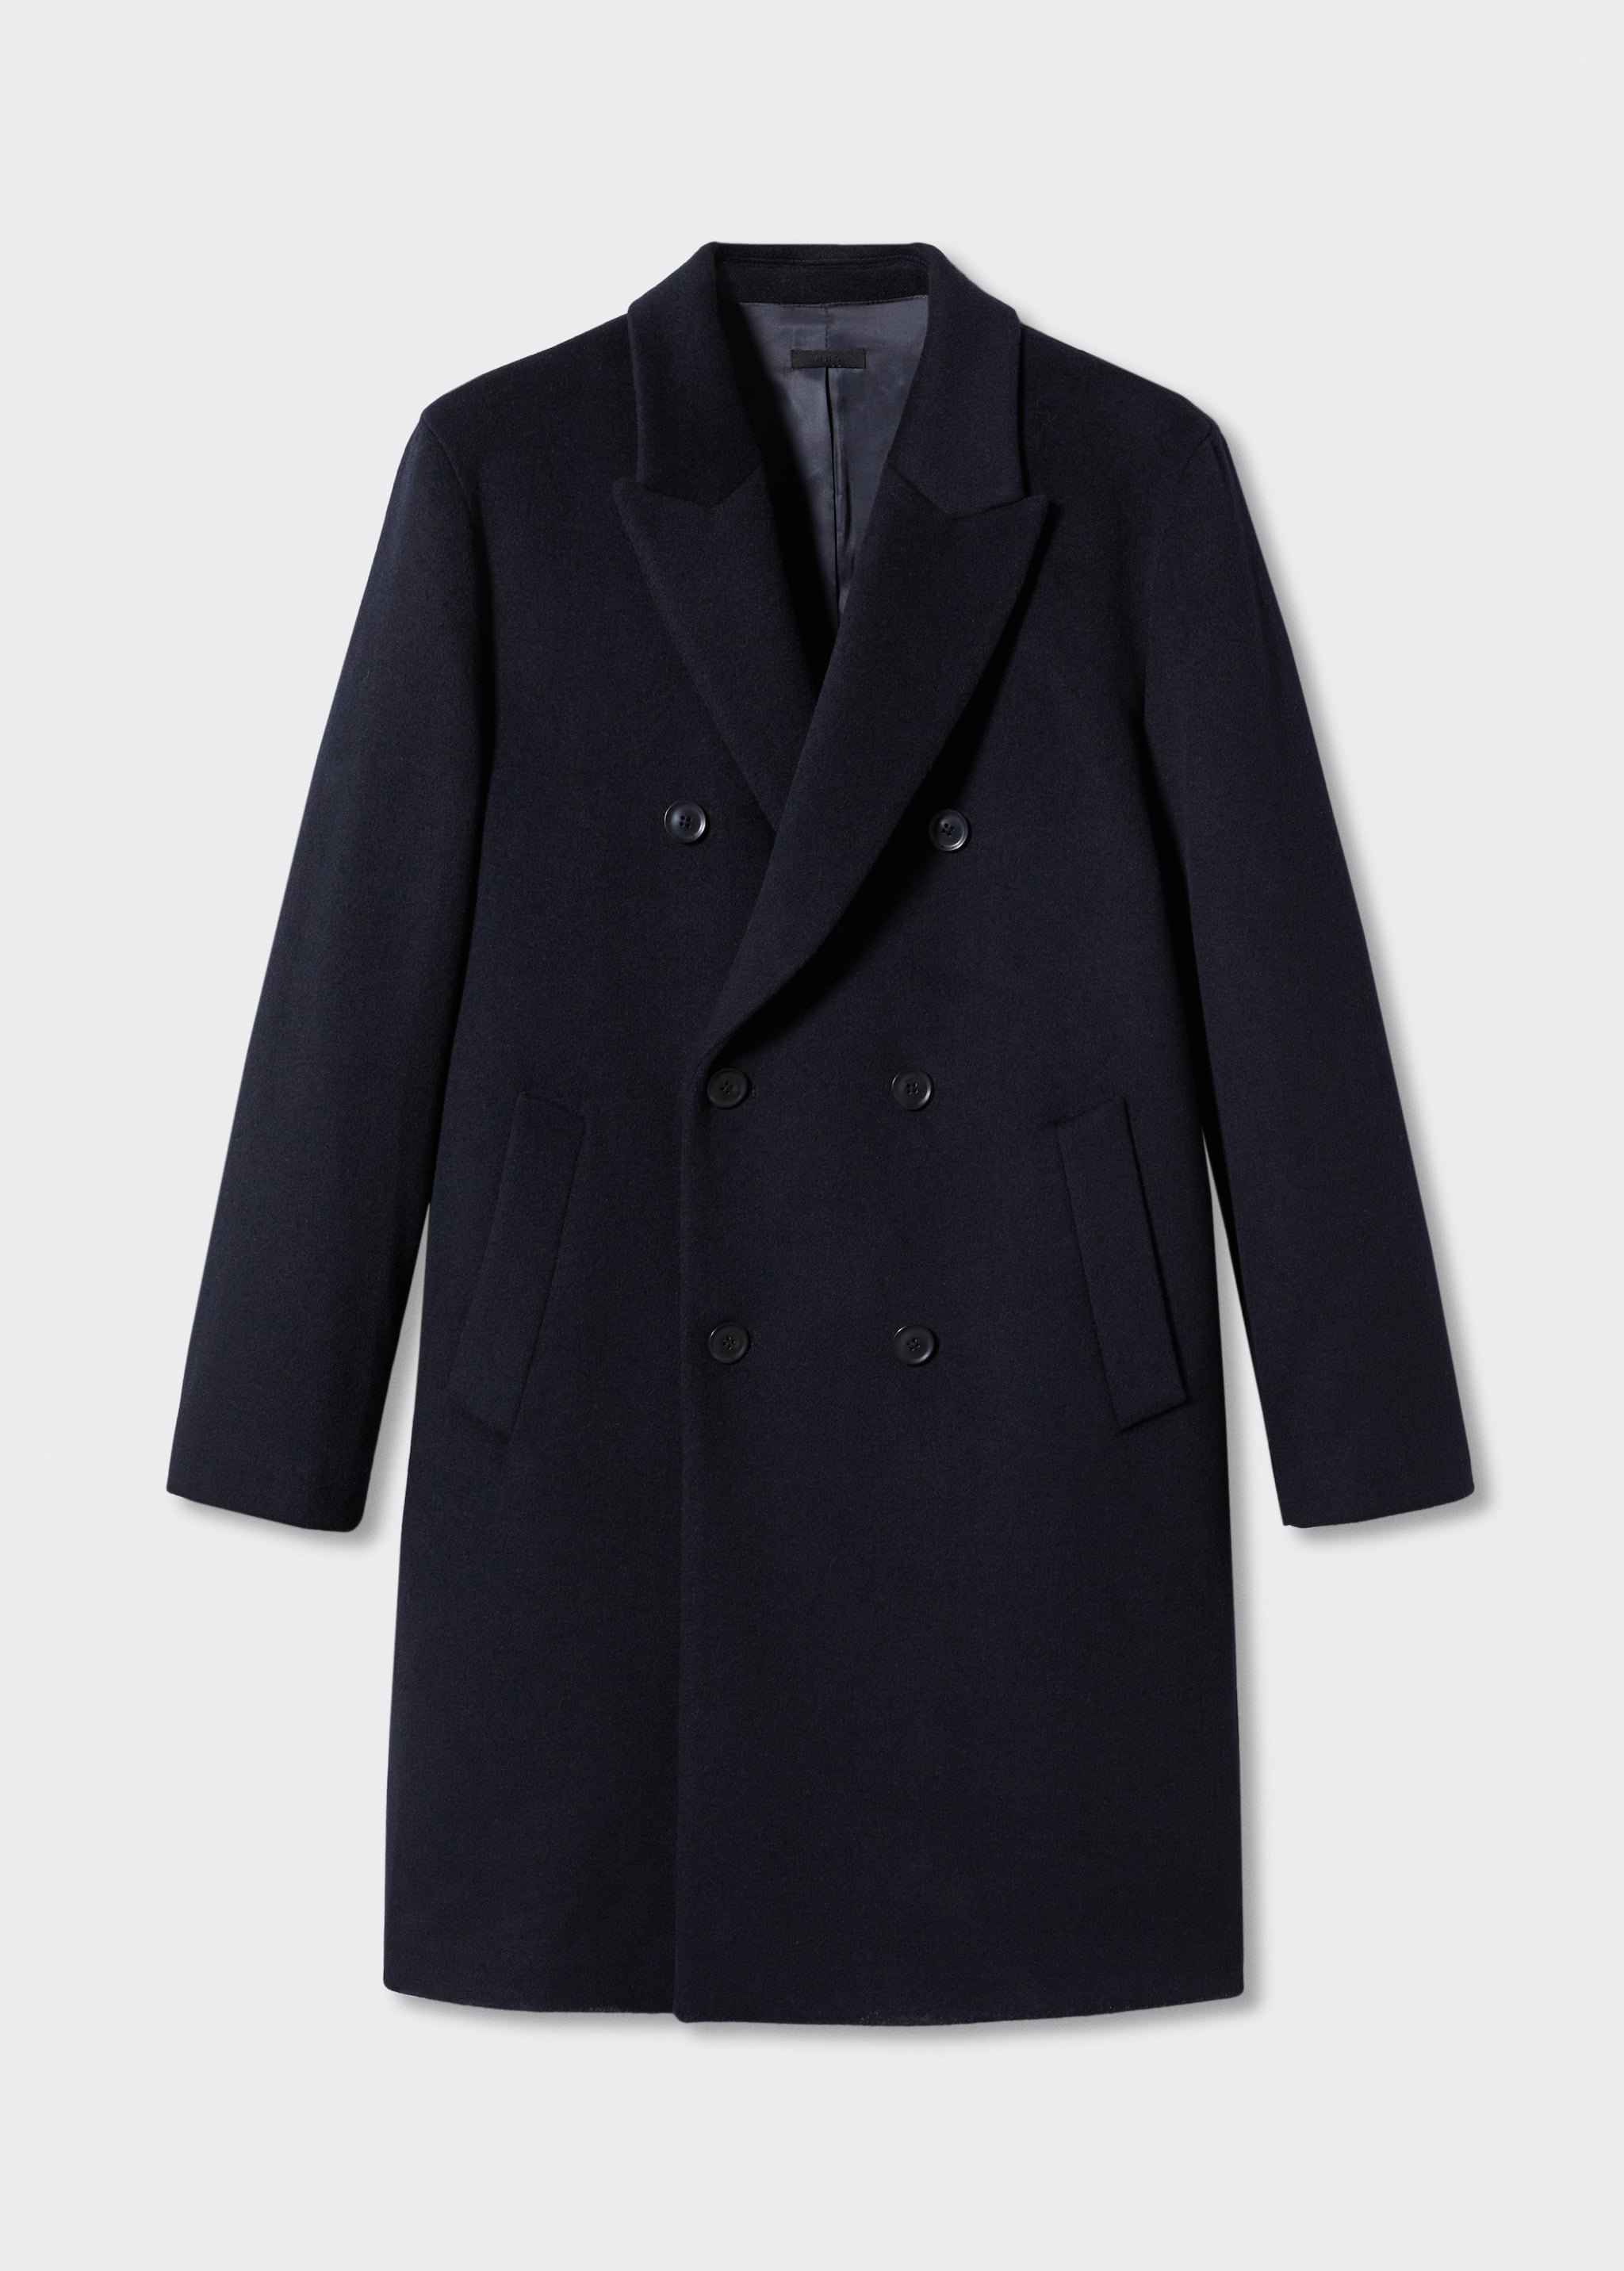 Wool overcoat - Article without model